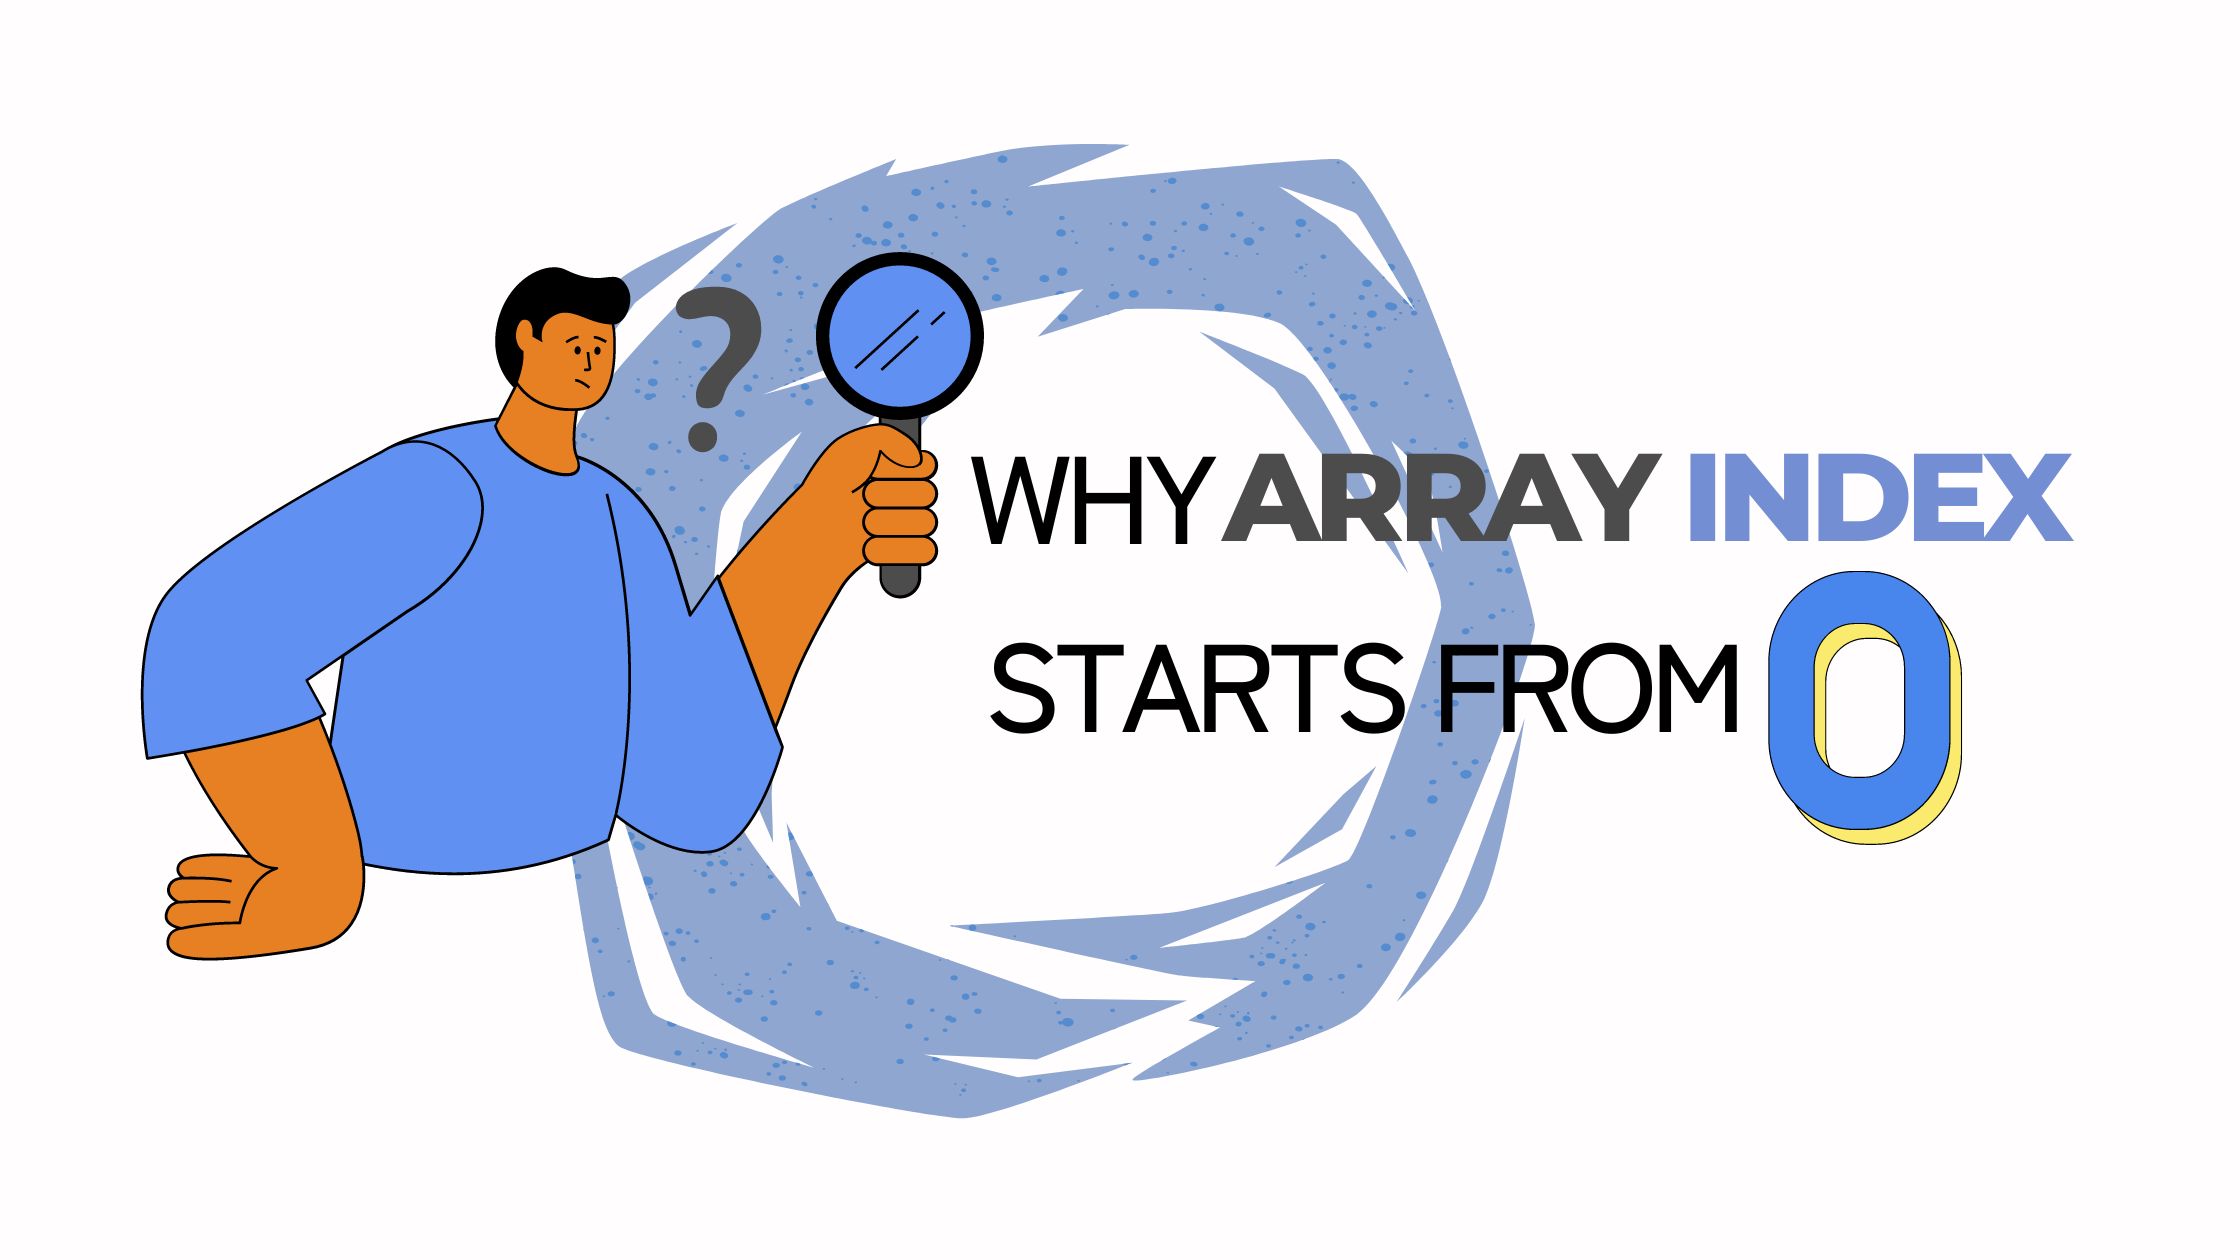 blog banner of array start from zero with a vector image of a person with a